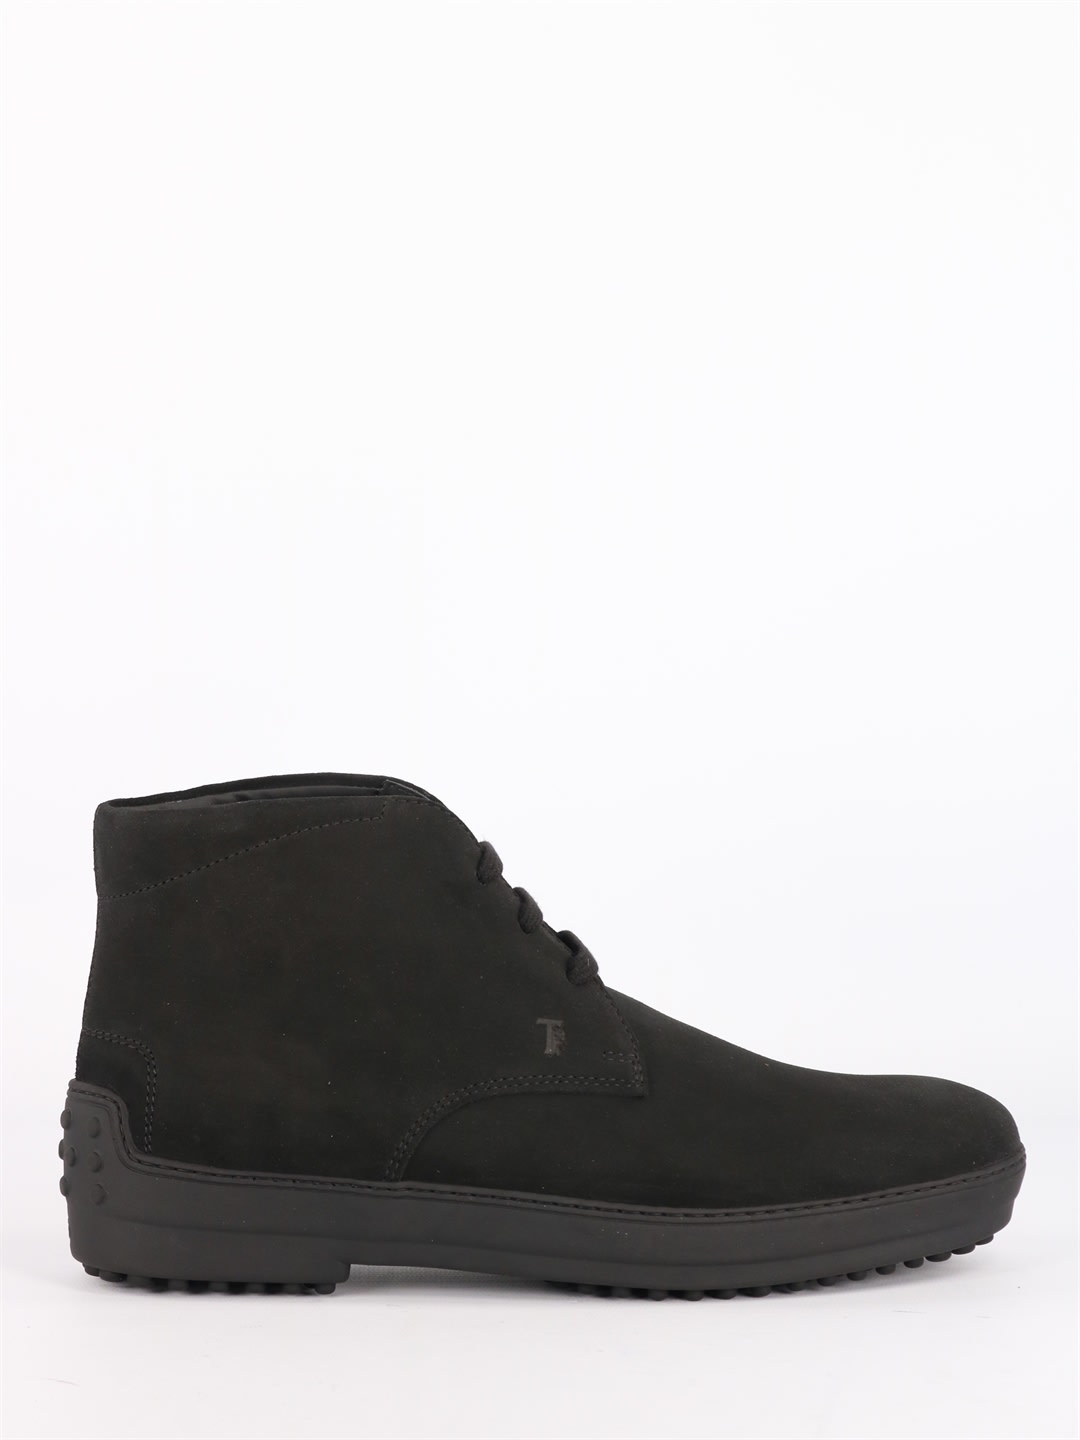 Tods Lace-up Shoe In Black Suede